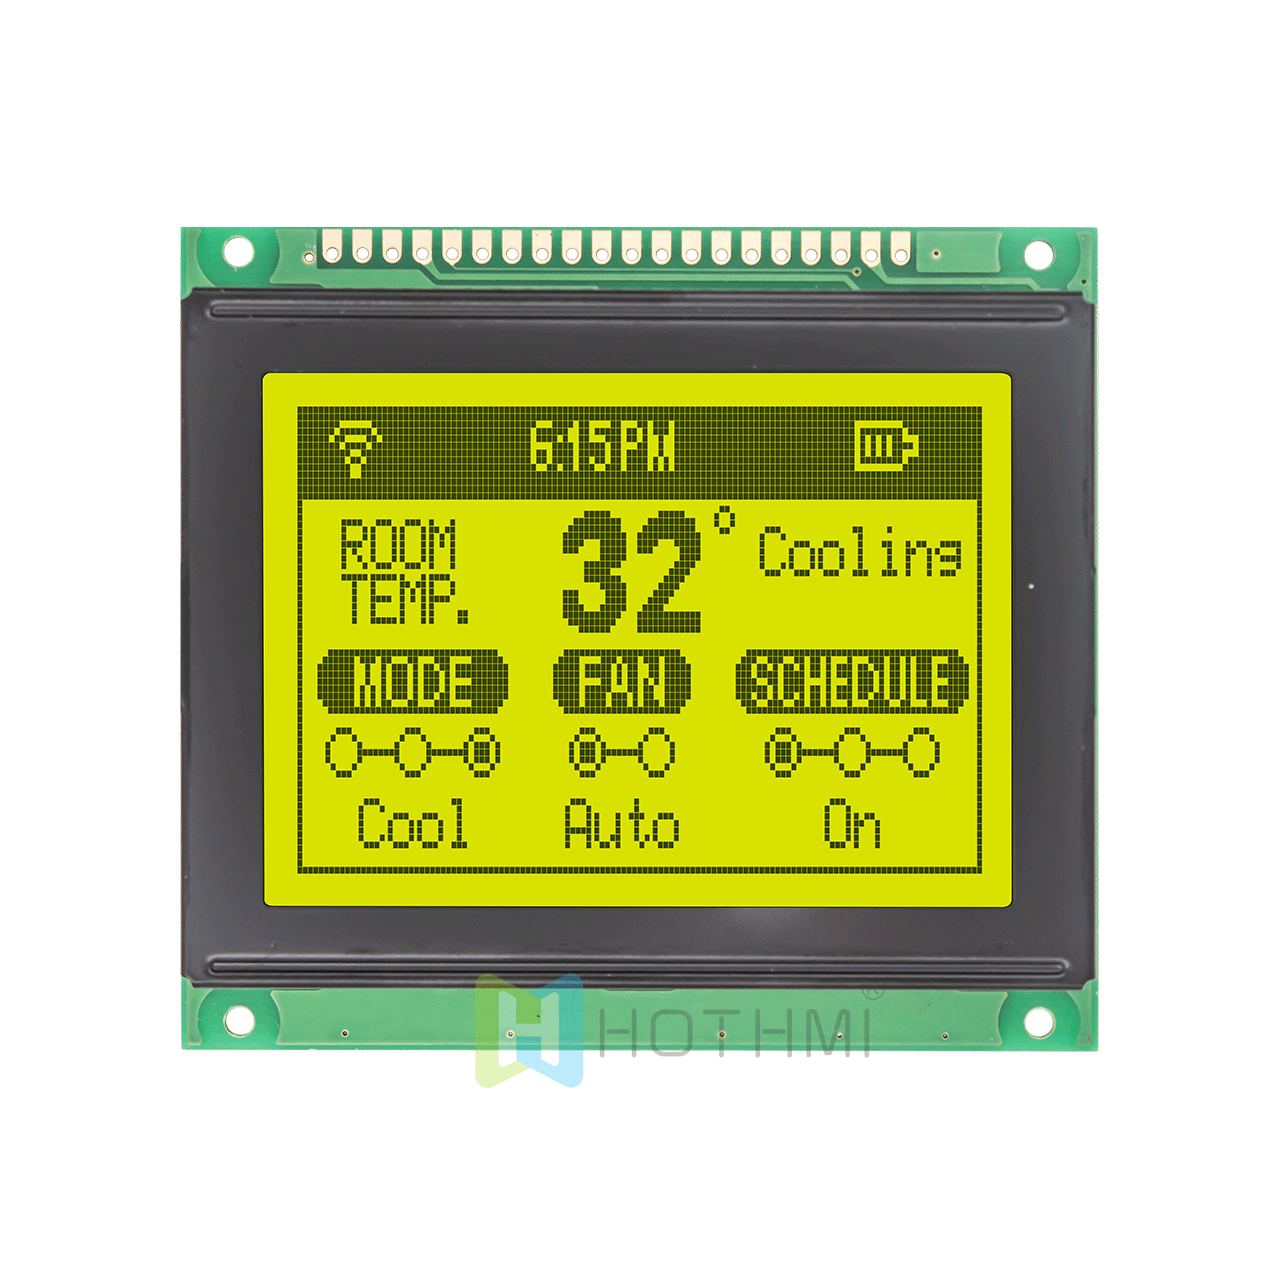 3" Yellow Green Graphic LCD Display/128x64 Graphic LCD Display Module/For Arduino/KS0108 or compatible